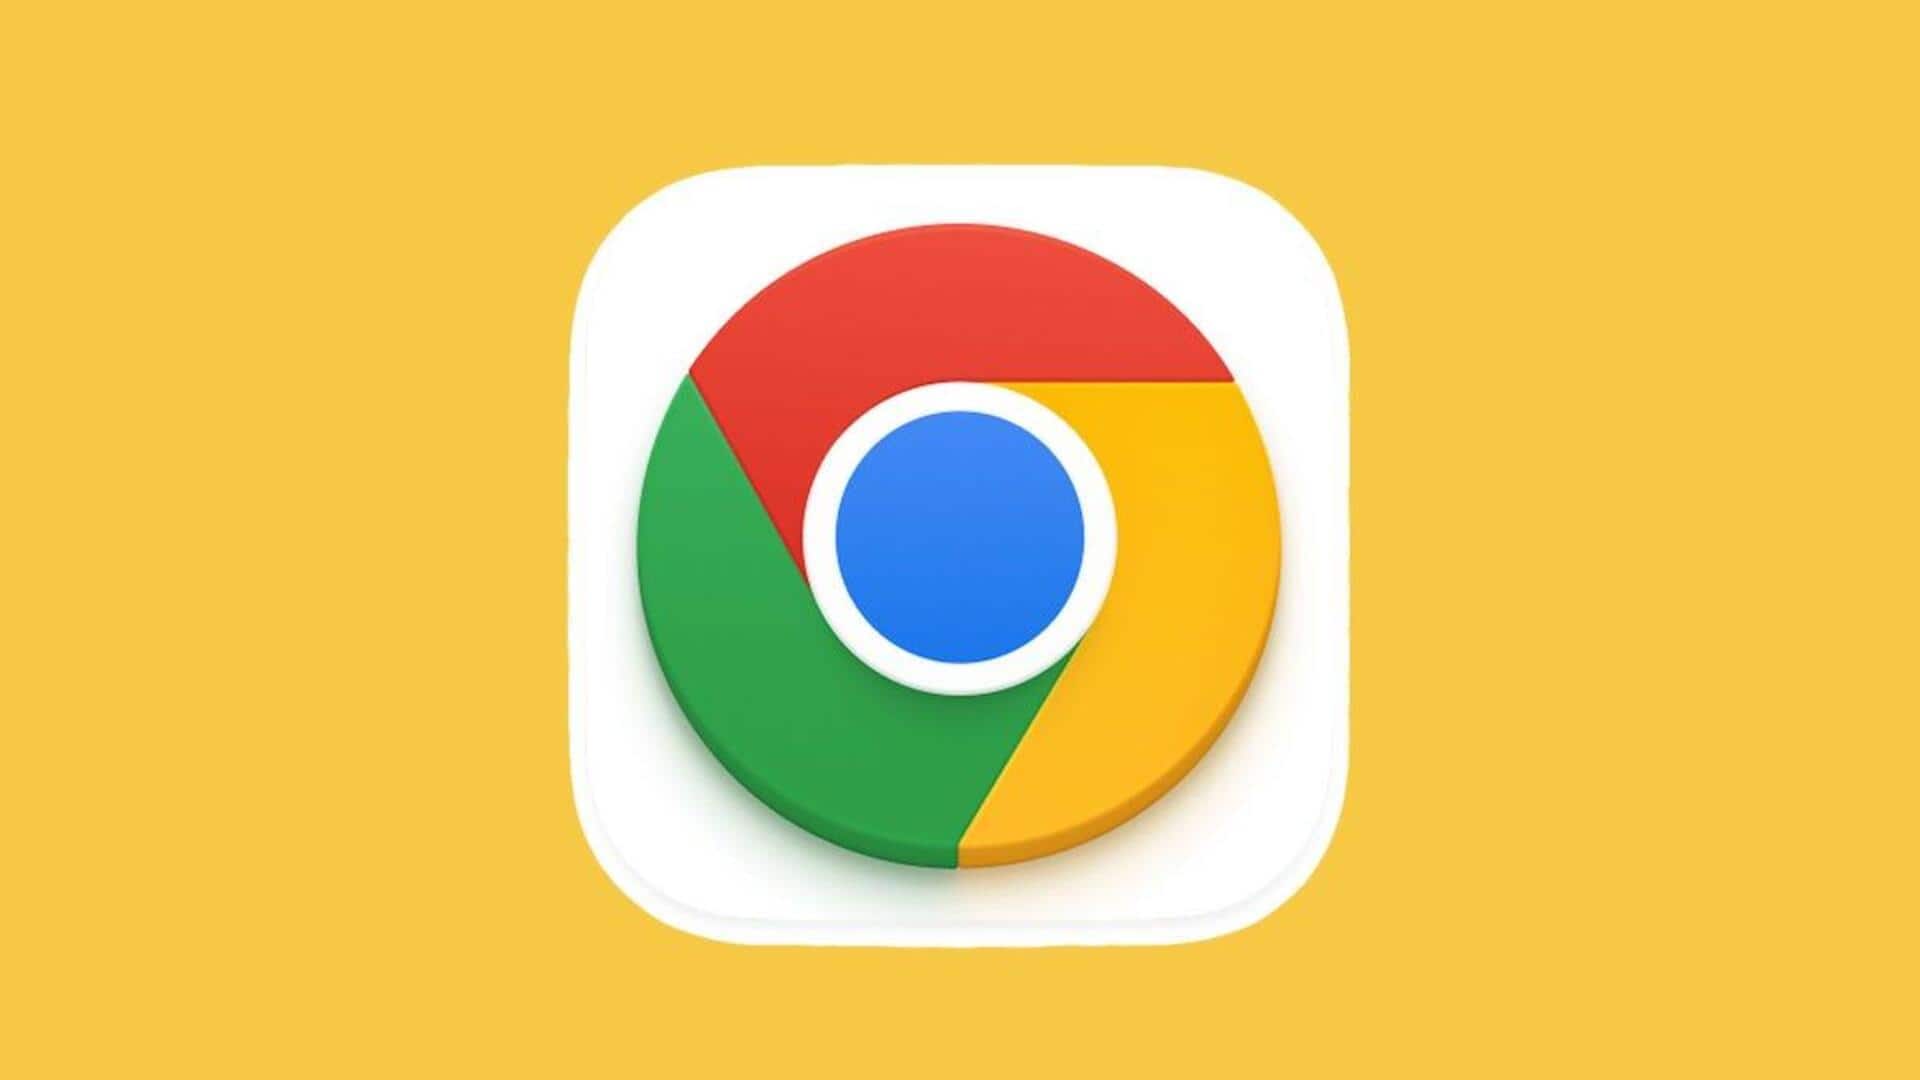 Follow these methods to share Google Chrome bookmarks with others